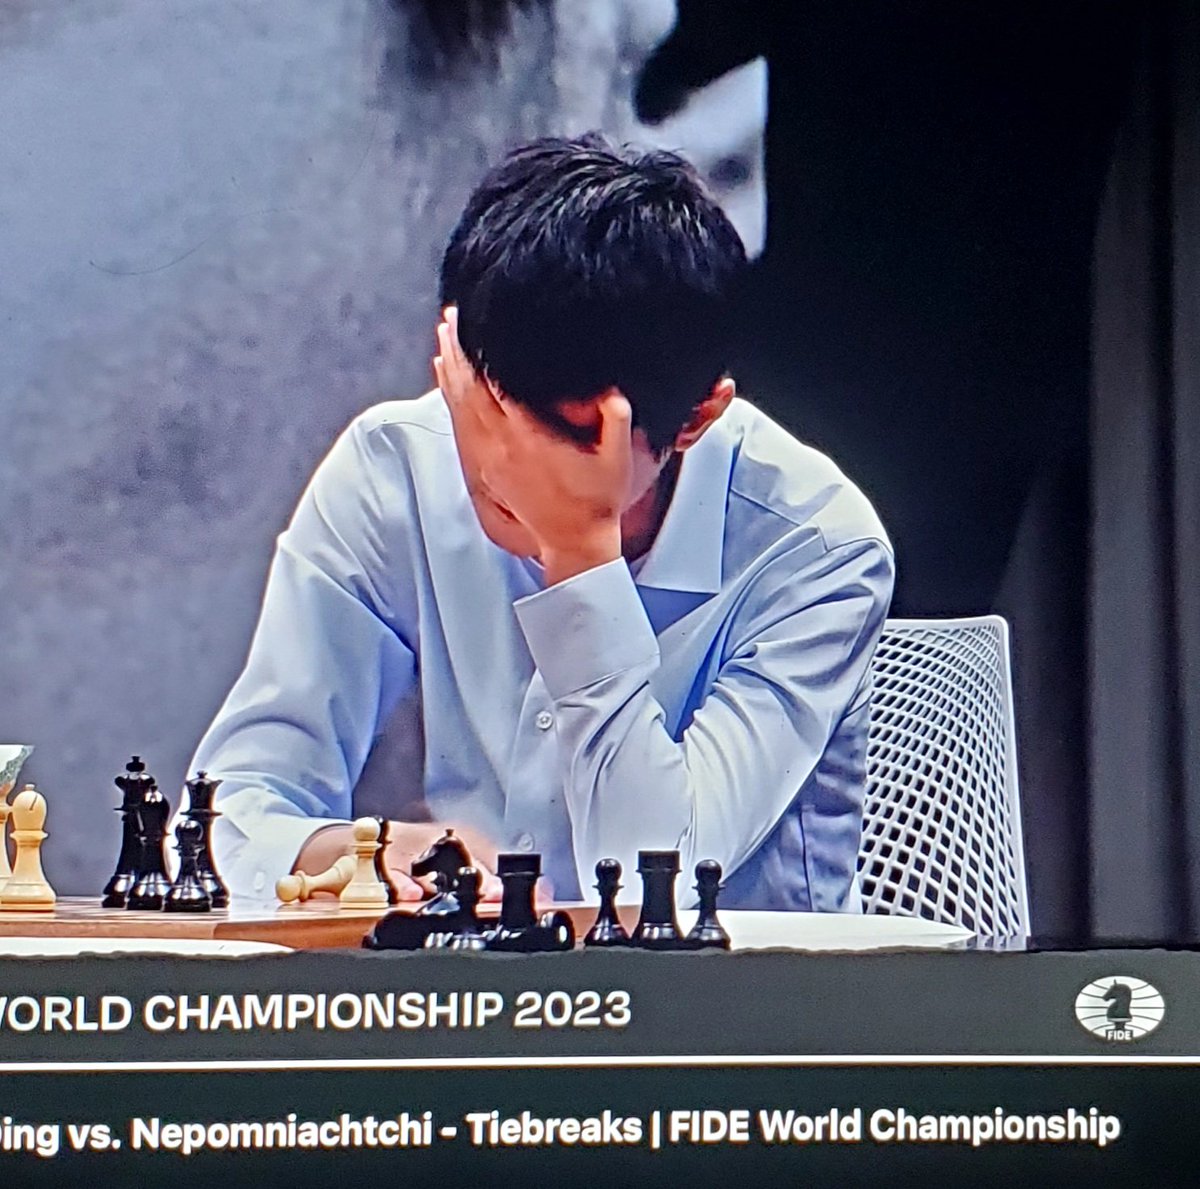 HE FUCKING DID IT! #DingLiren is the World Chess Champion! FUCK YEAH! I AM LITERALLY SCREAMING IN MY APARTMENT! #CHESS #dingnepo #WorldChessChampionship